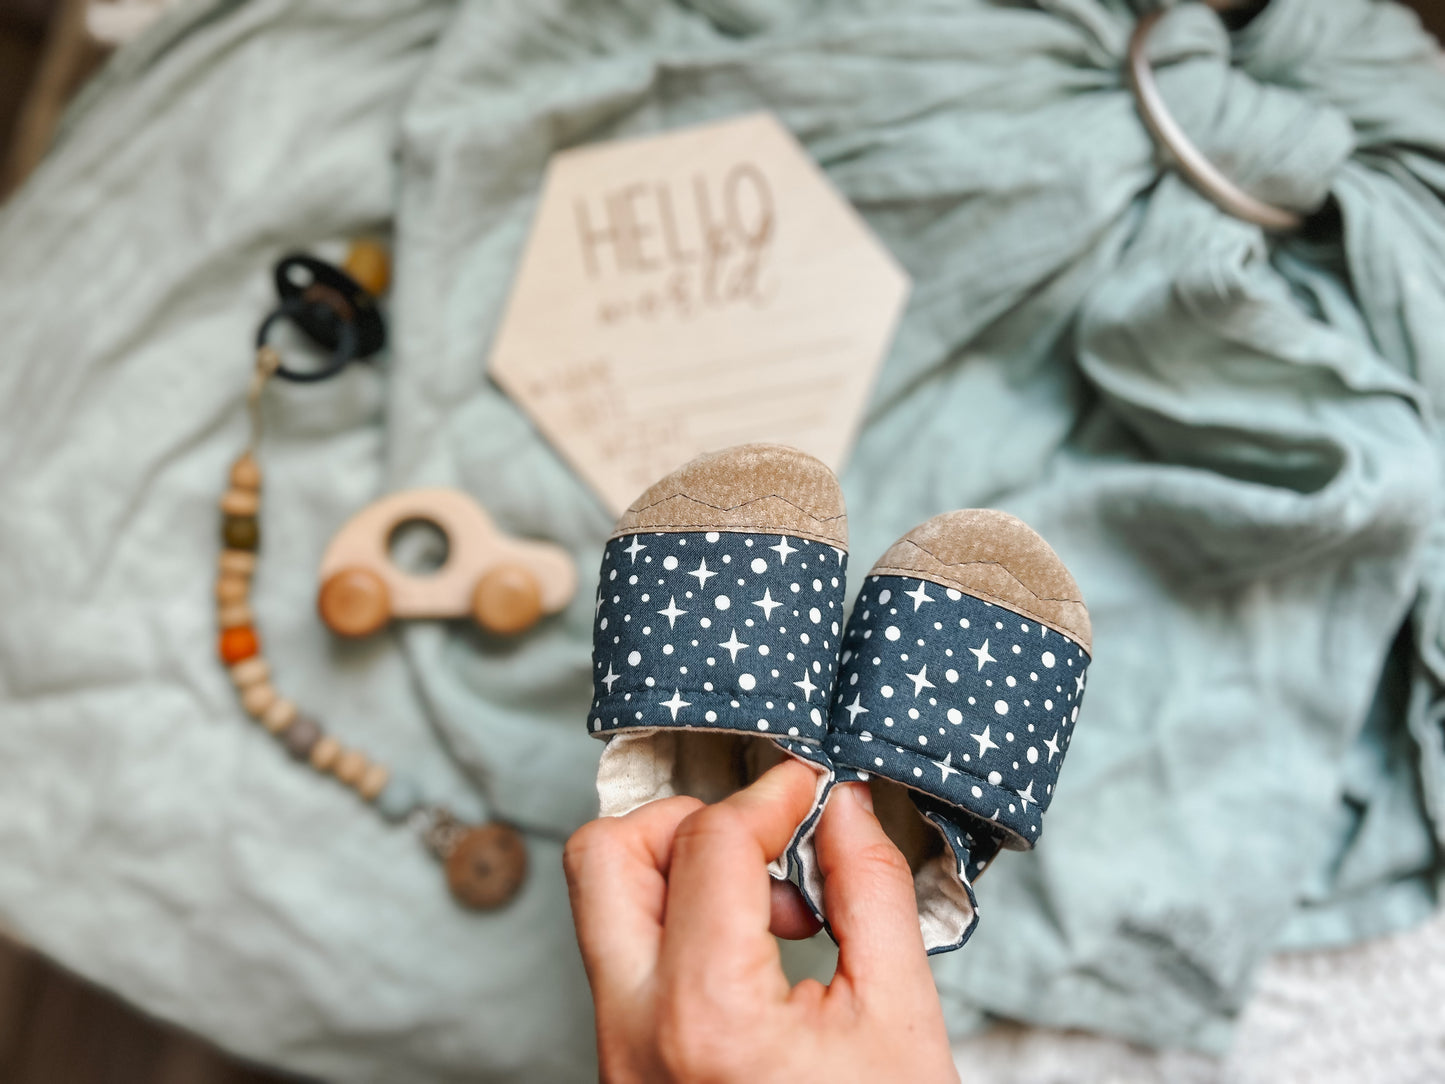 navy stars soft soled baby shoes